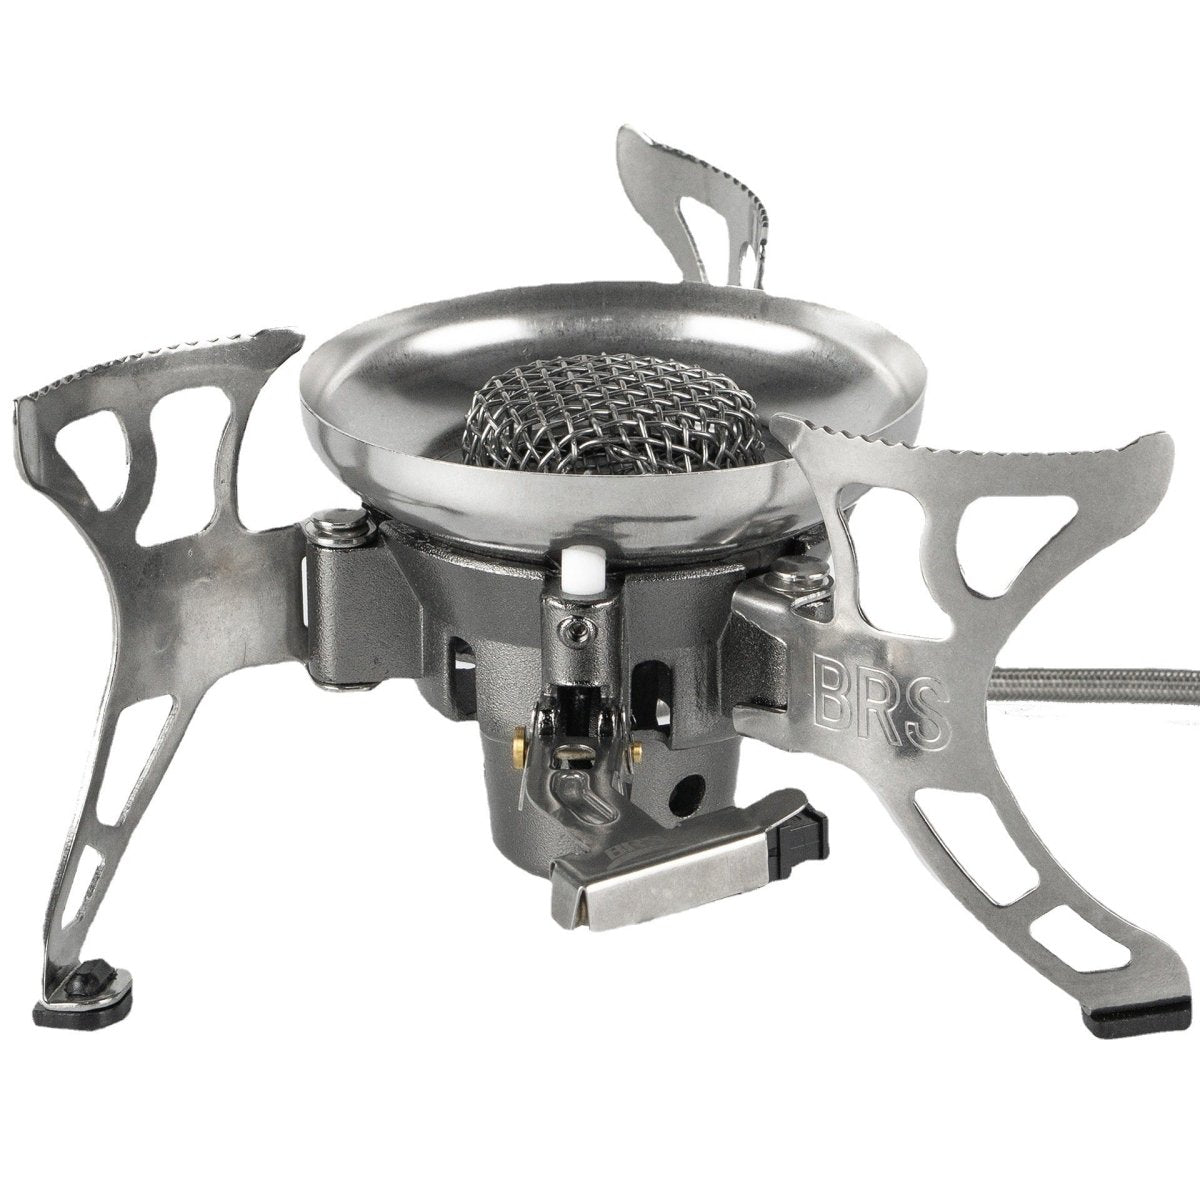 TrendyAffordables | Portable Outdoor Camping Gas Stove - TrendyAffordables - 0